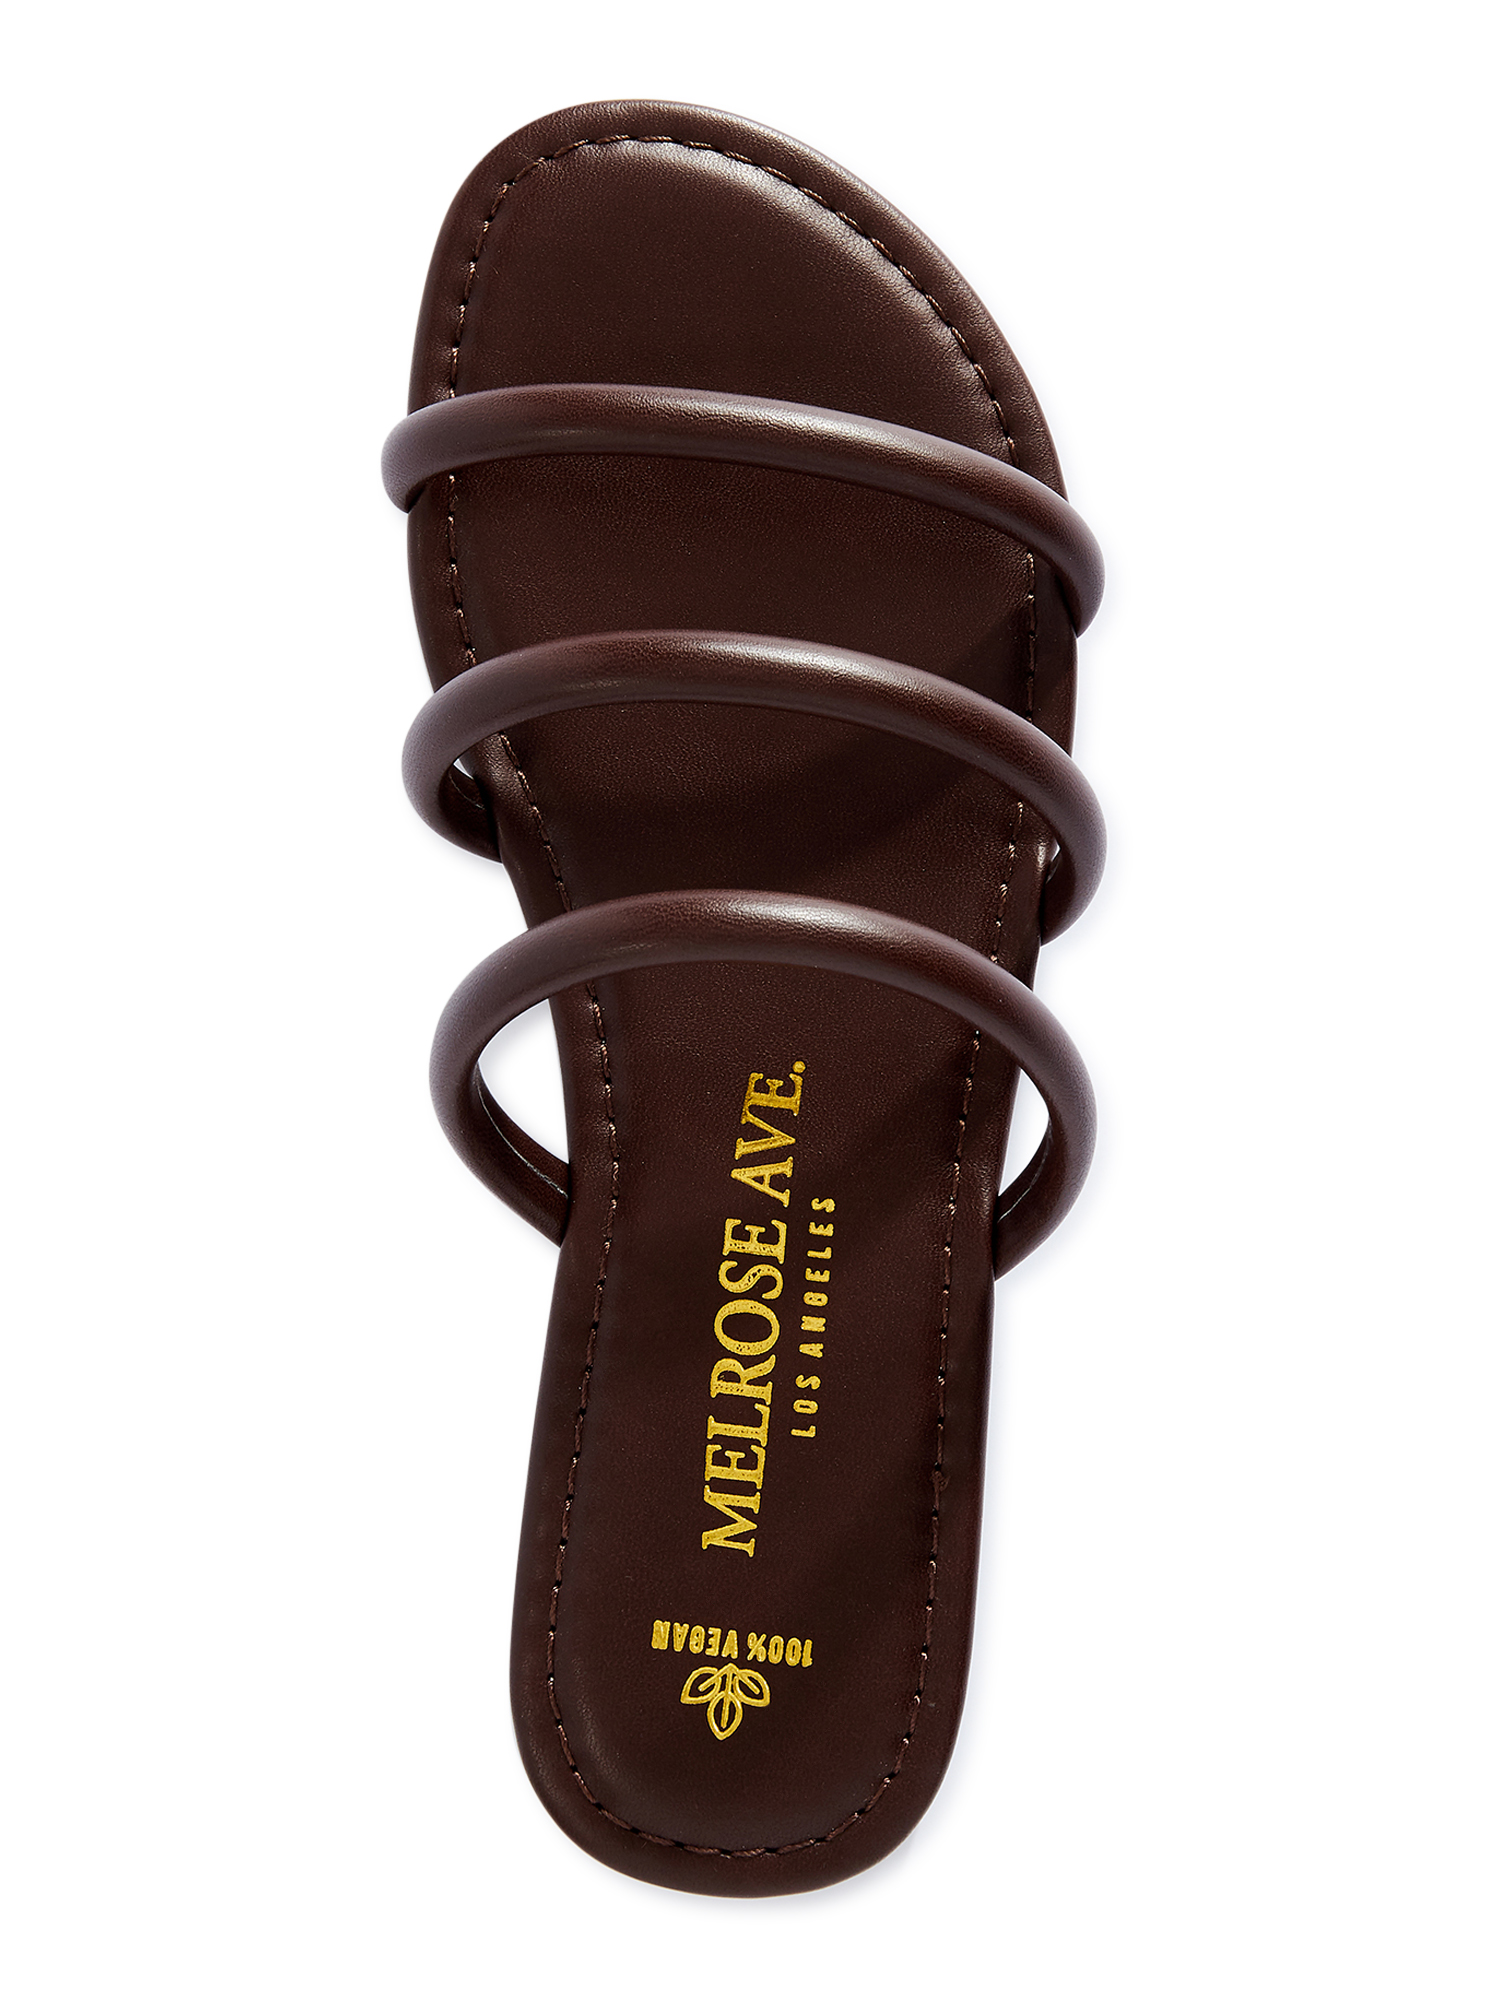 Melrose Ave Women's Faux Leather Three Strap Slide Sandals - image 5 of 6